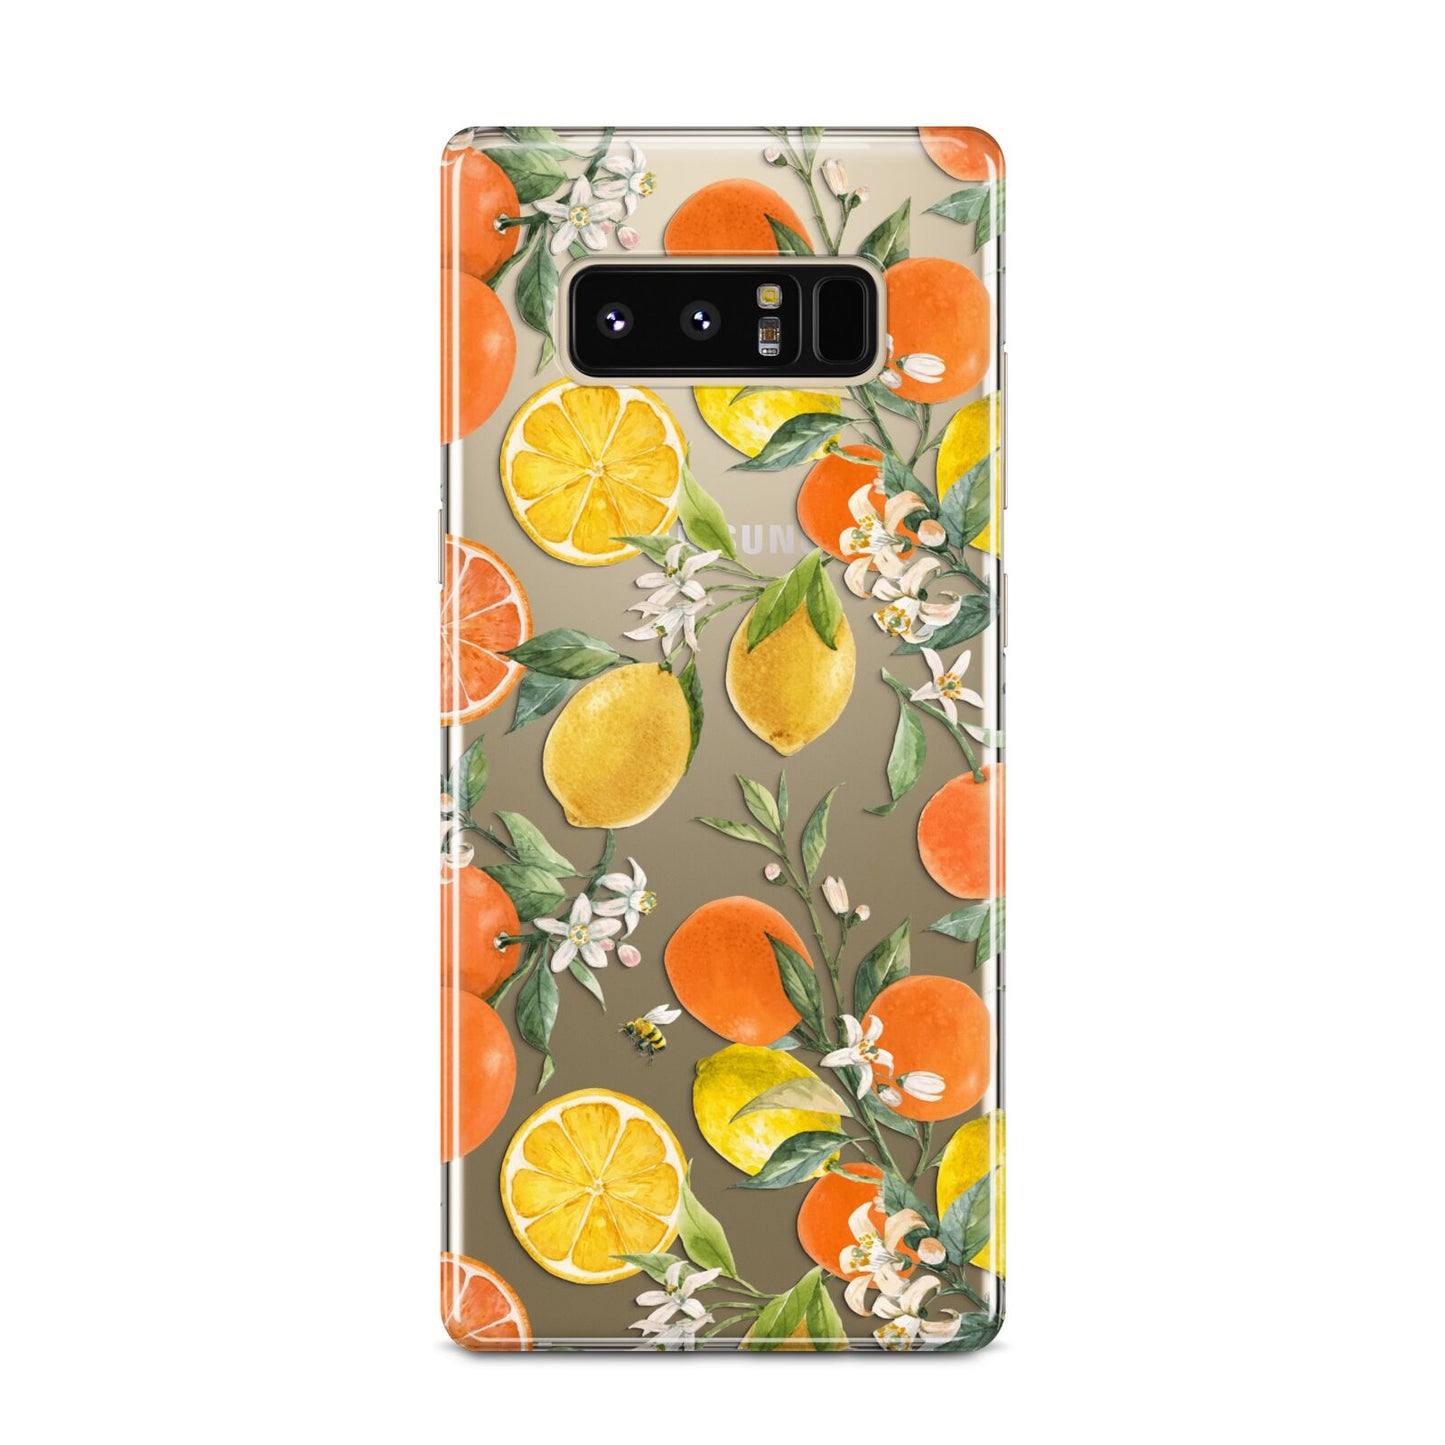 Lemons and Oranges Samsung Galaxy Note 8 Case